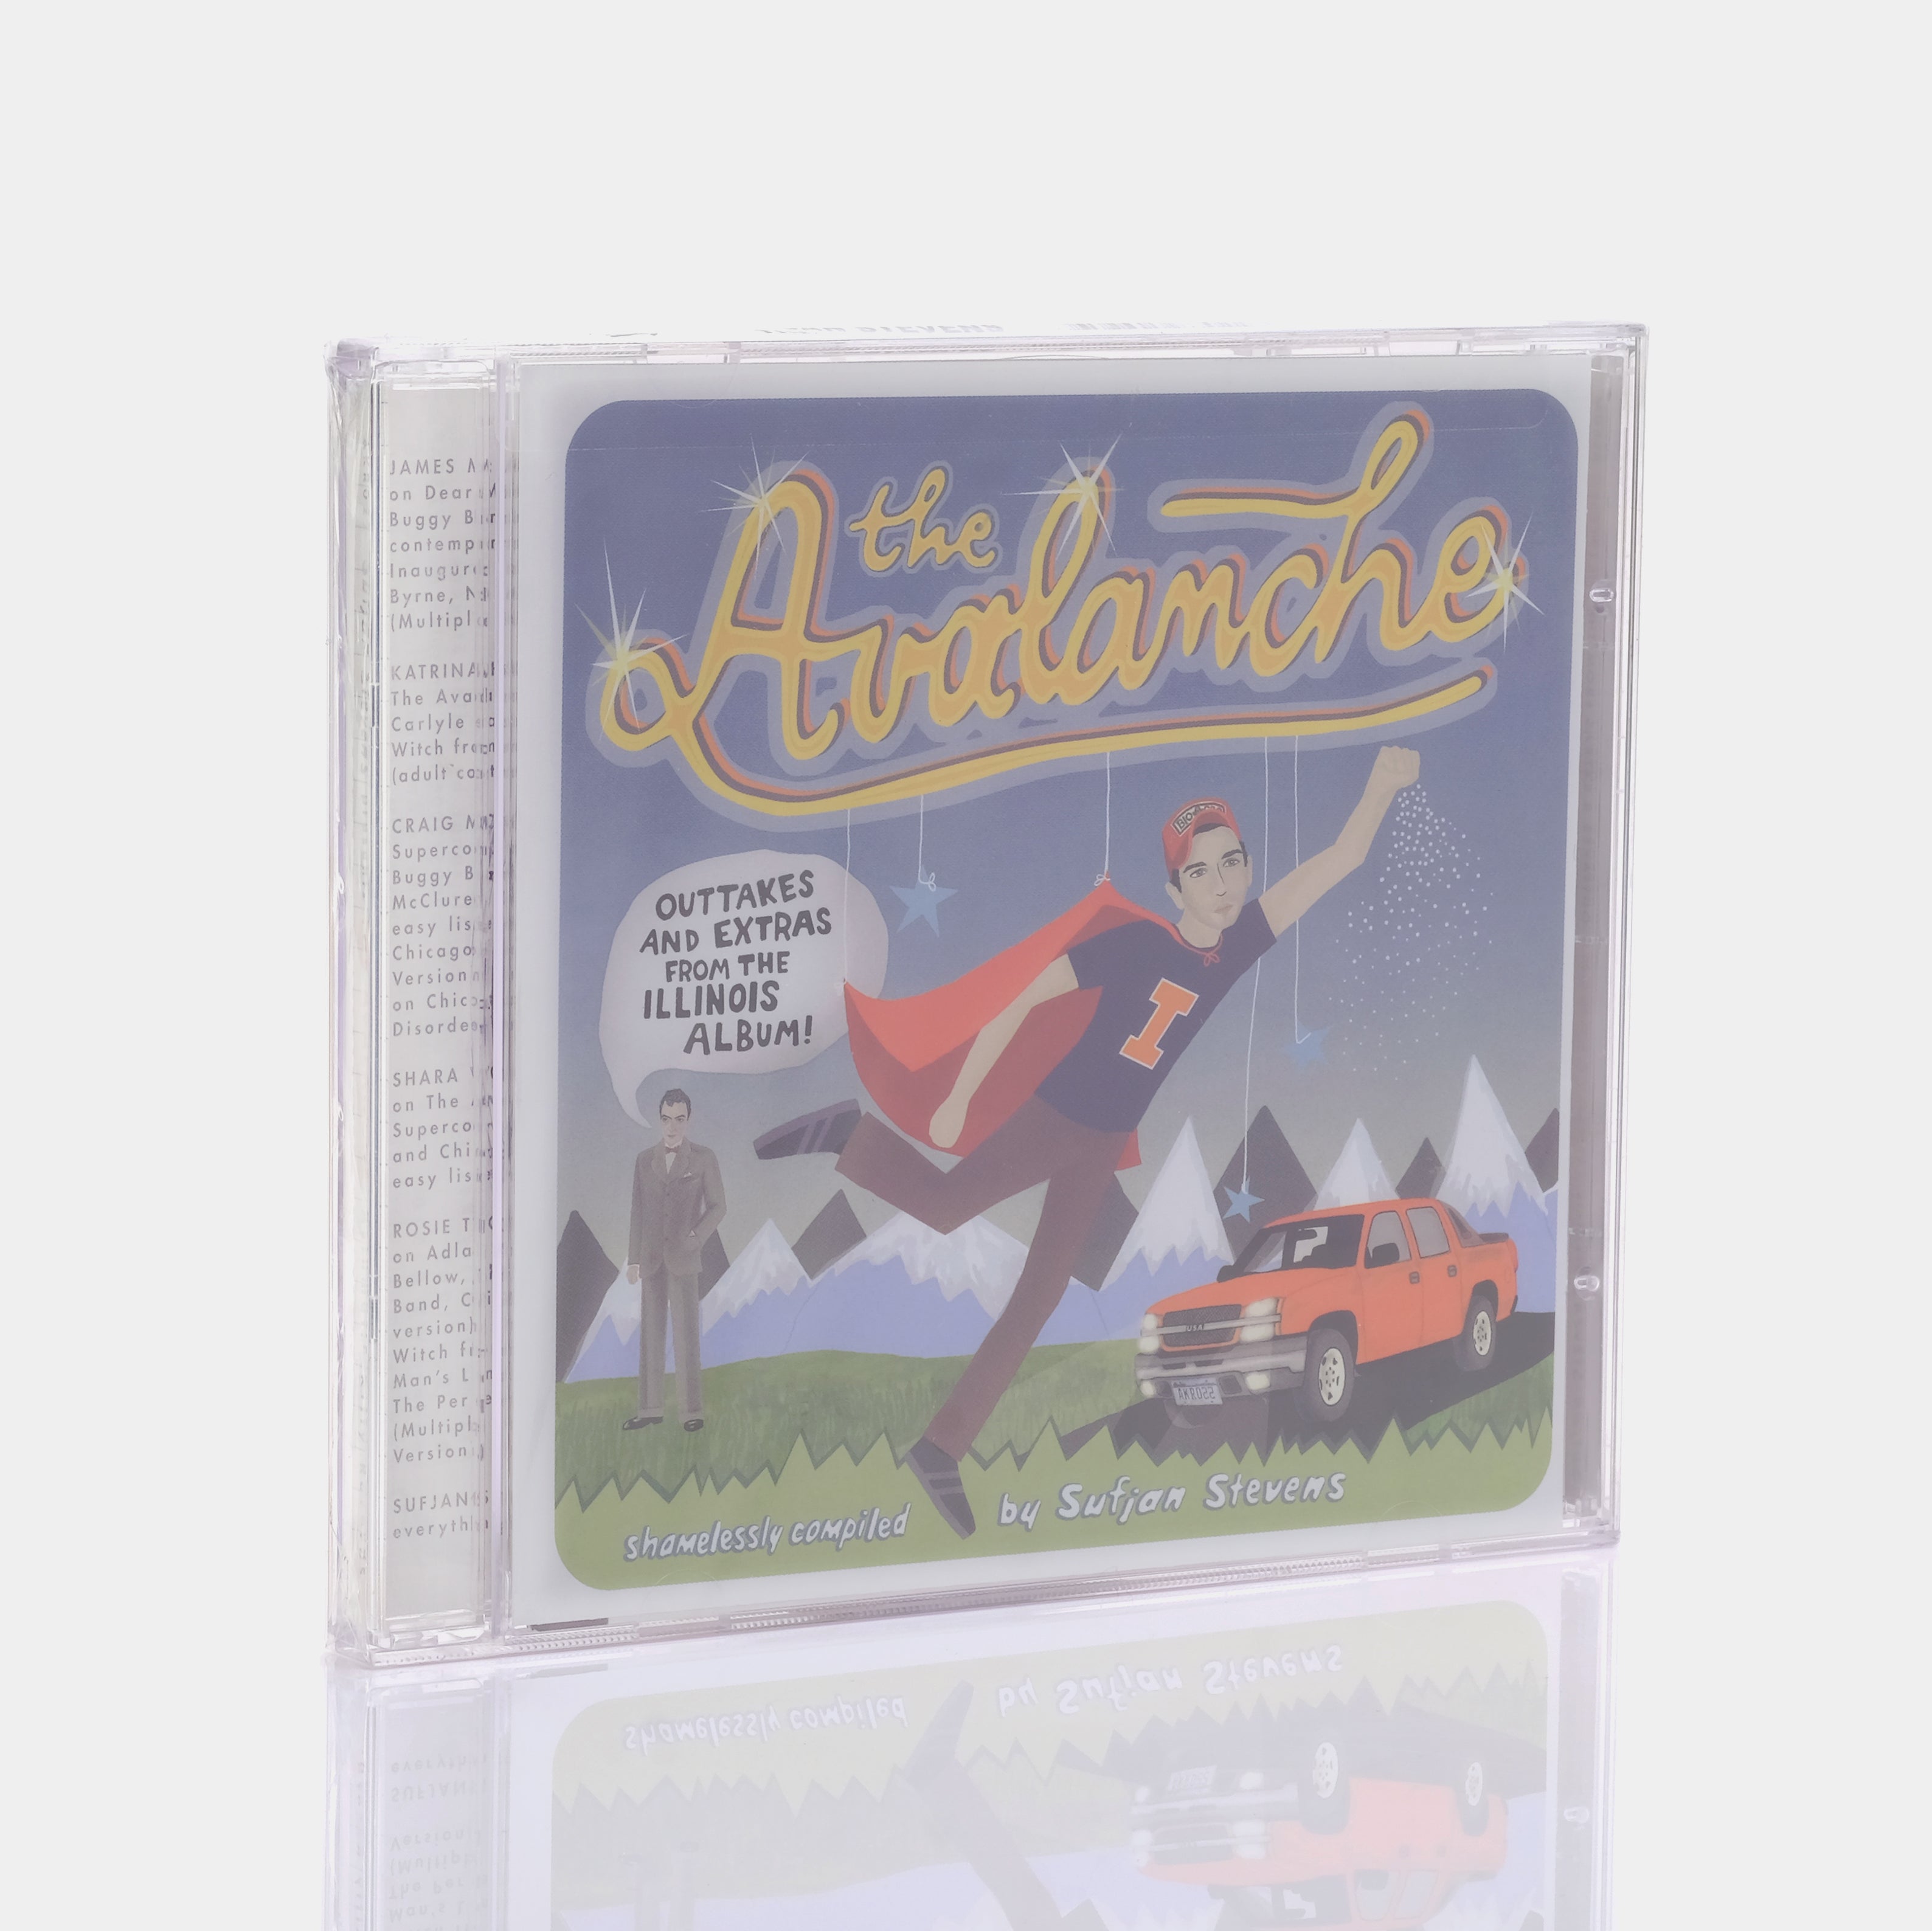 Sufjan Stevens - The Avalanche (Outtakes & Extras From The Illinois Album) CD